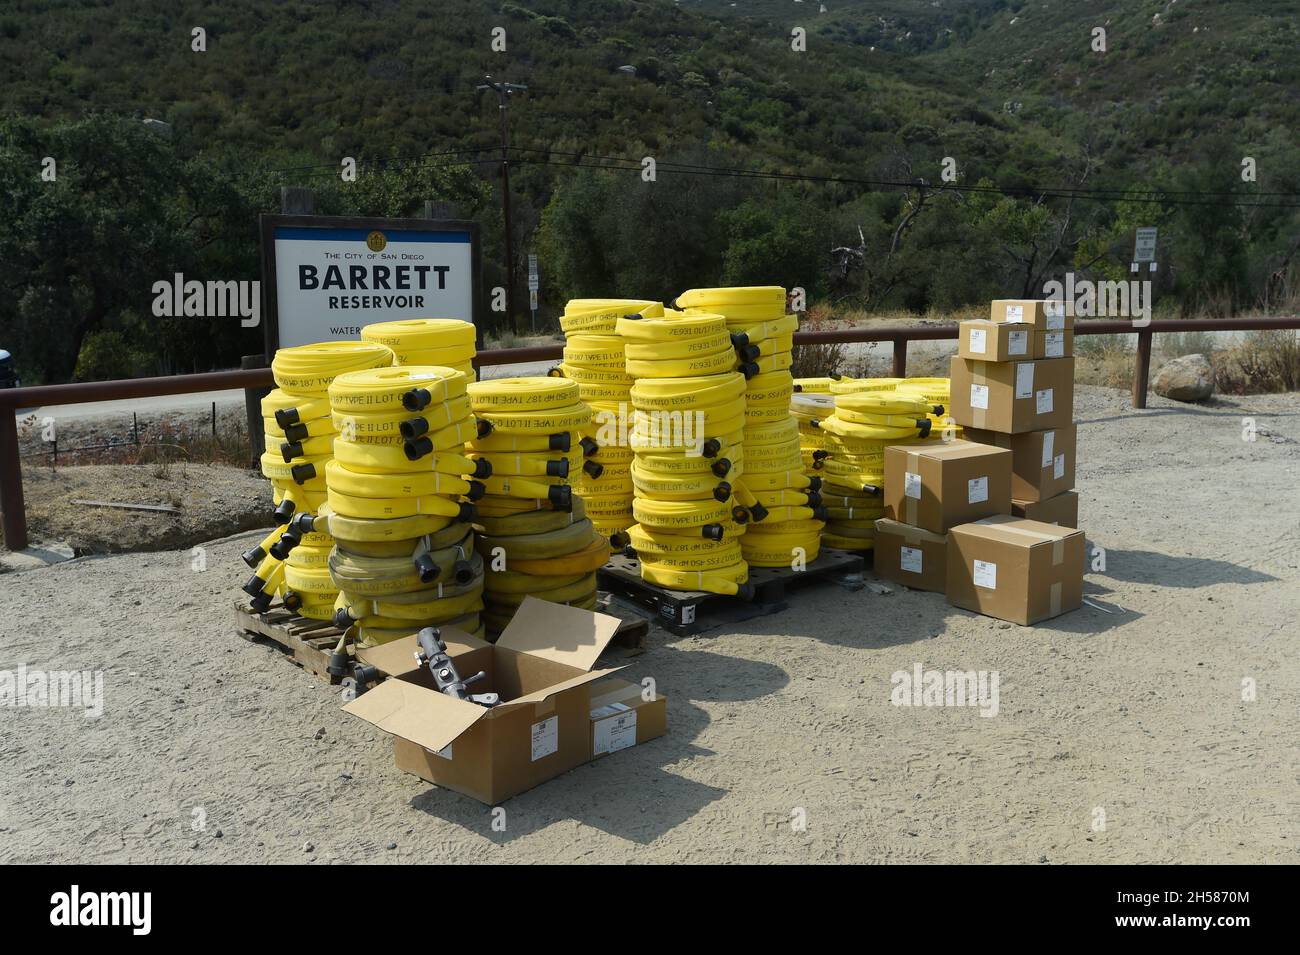 Cal Fire hose packs and associated valves await use at wildland fire east of San Diego, California. Stock Photo